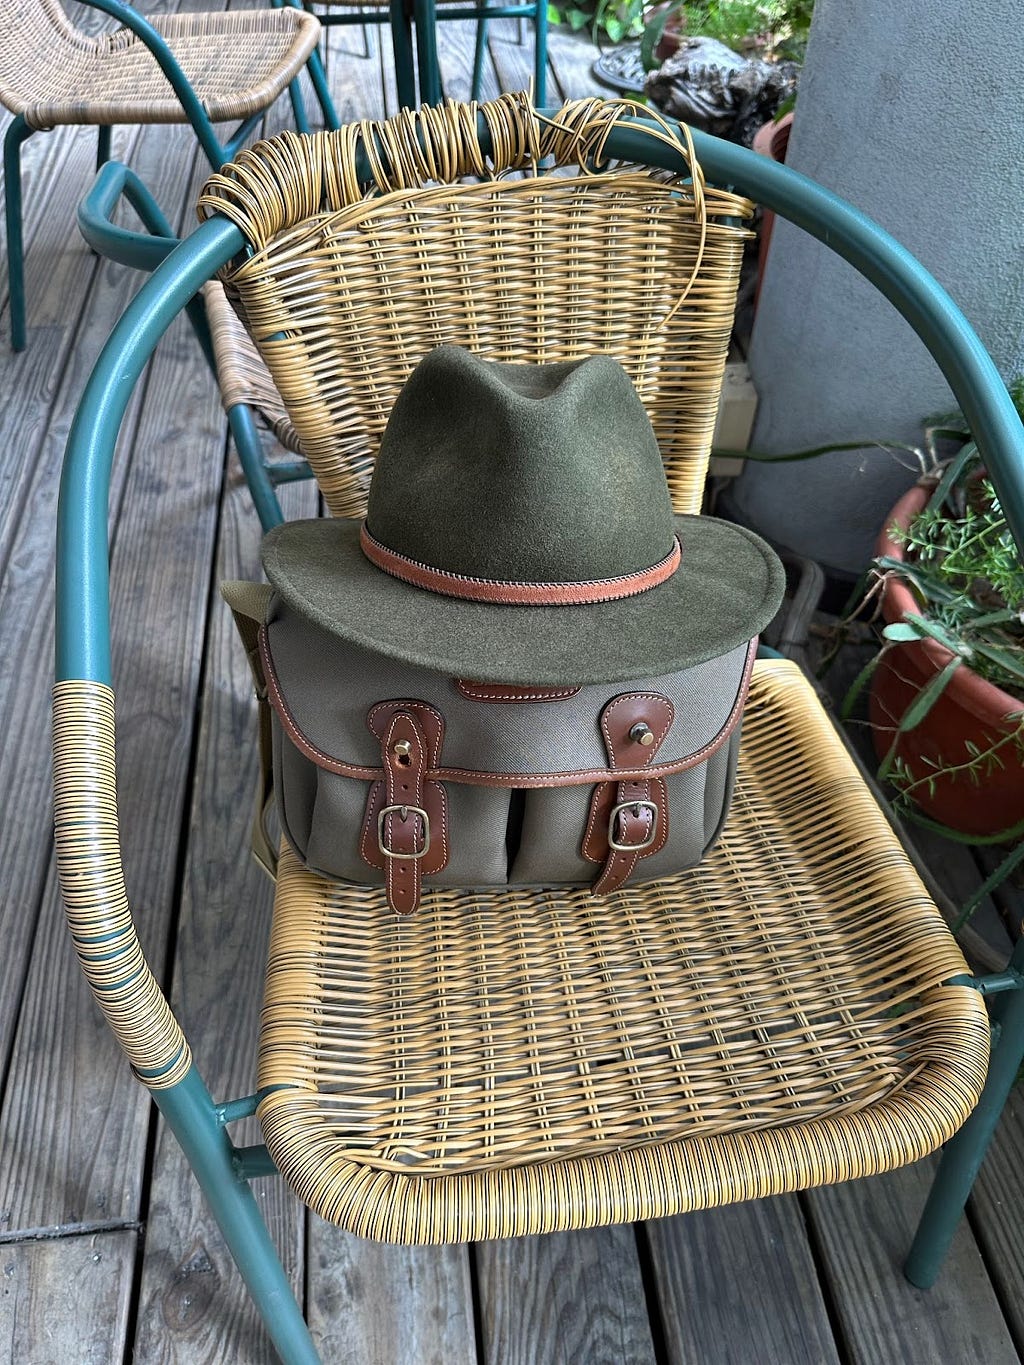 Wicker chair with small sage green satchel/bag with brown leather trim and straps resting on it. Green felt fedora on top of the bag.